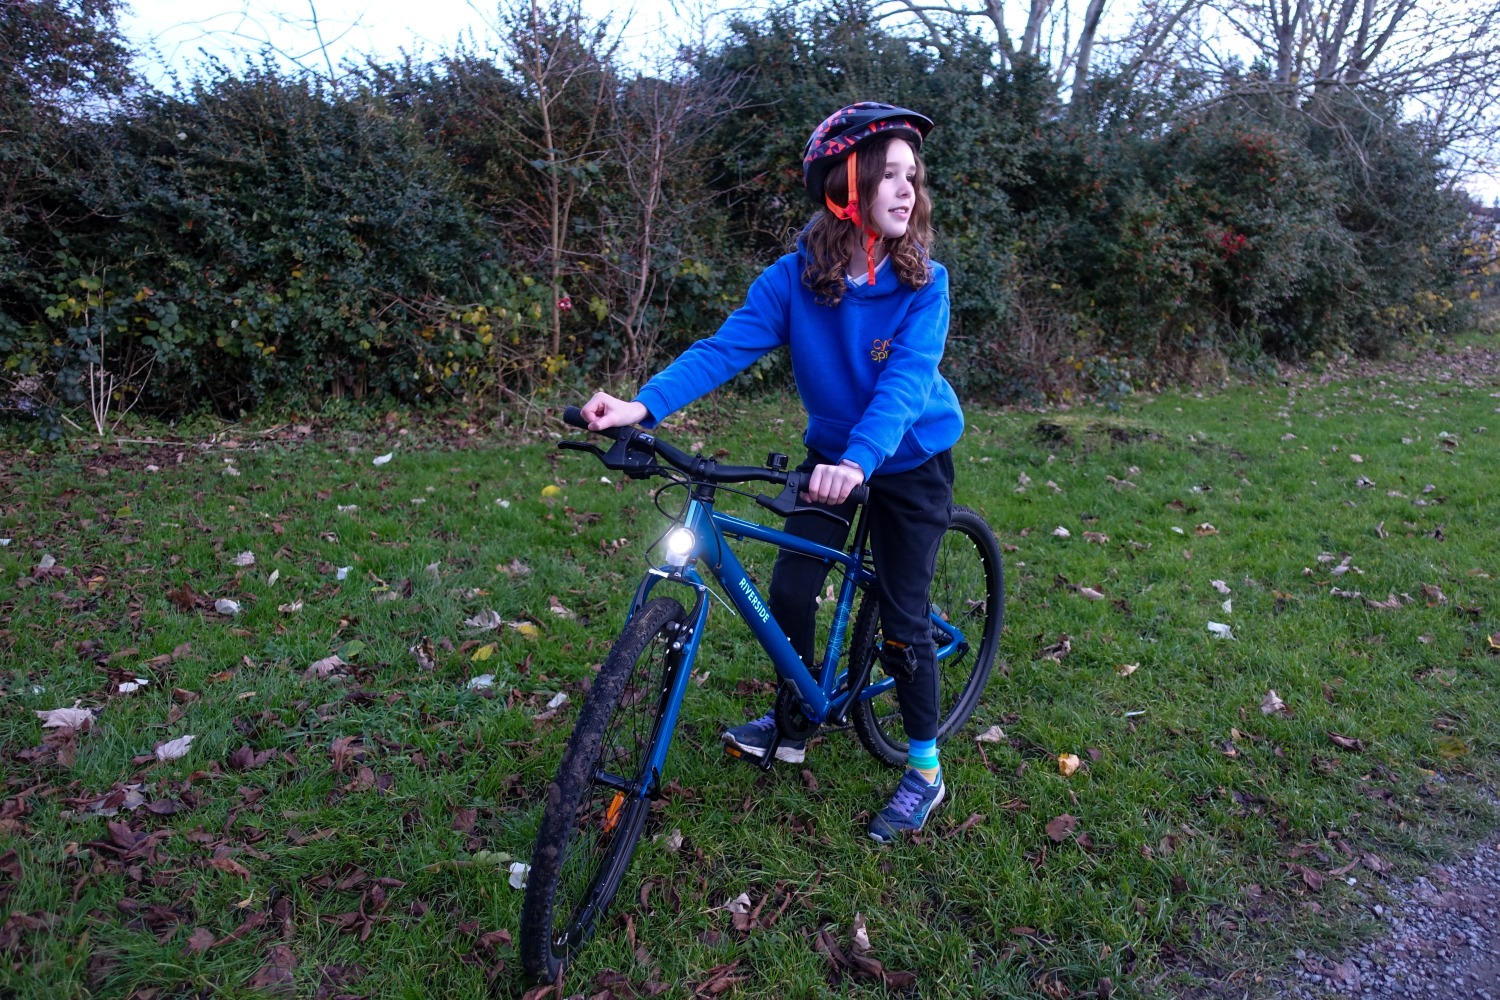 Girl riding the Blue Riverside 900, with the front light on